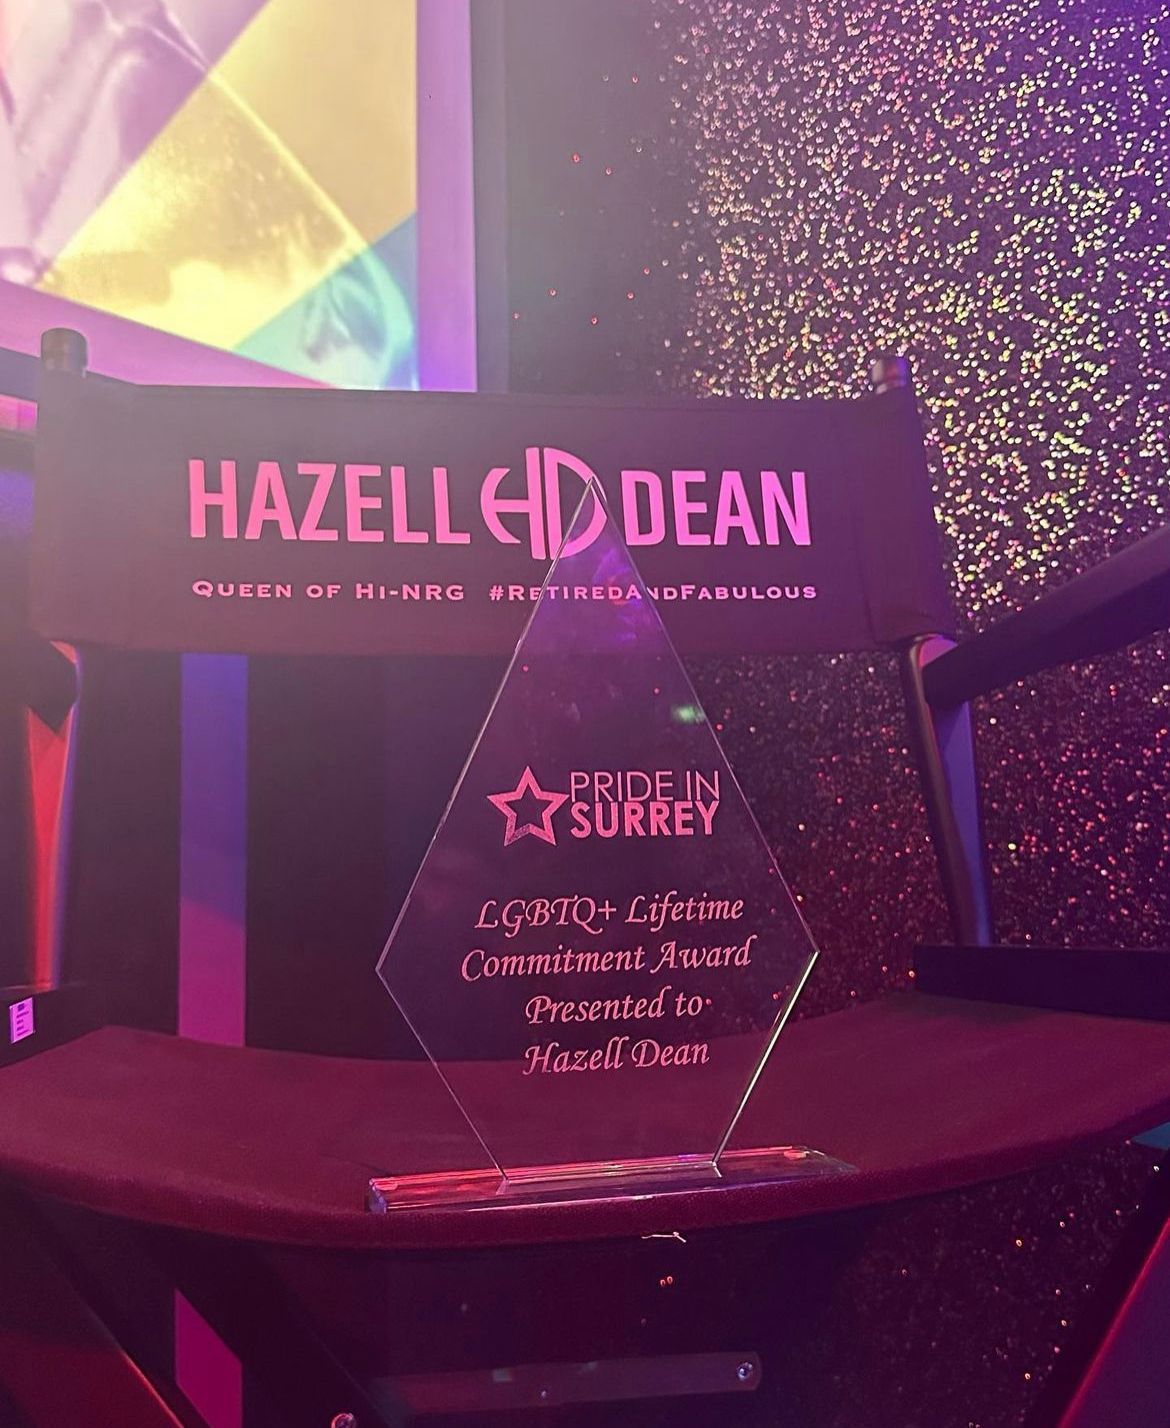 Hazell Dean is presented with LGBTQ+ Lifetime Commitment Award 2024 from Pride in Surrey. 